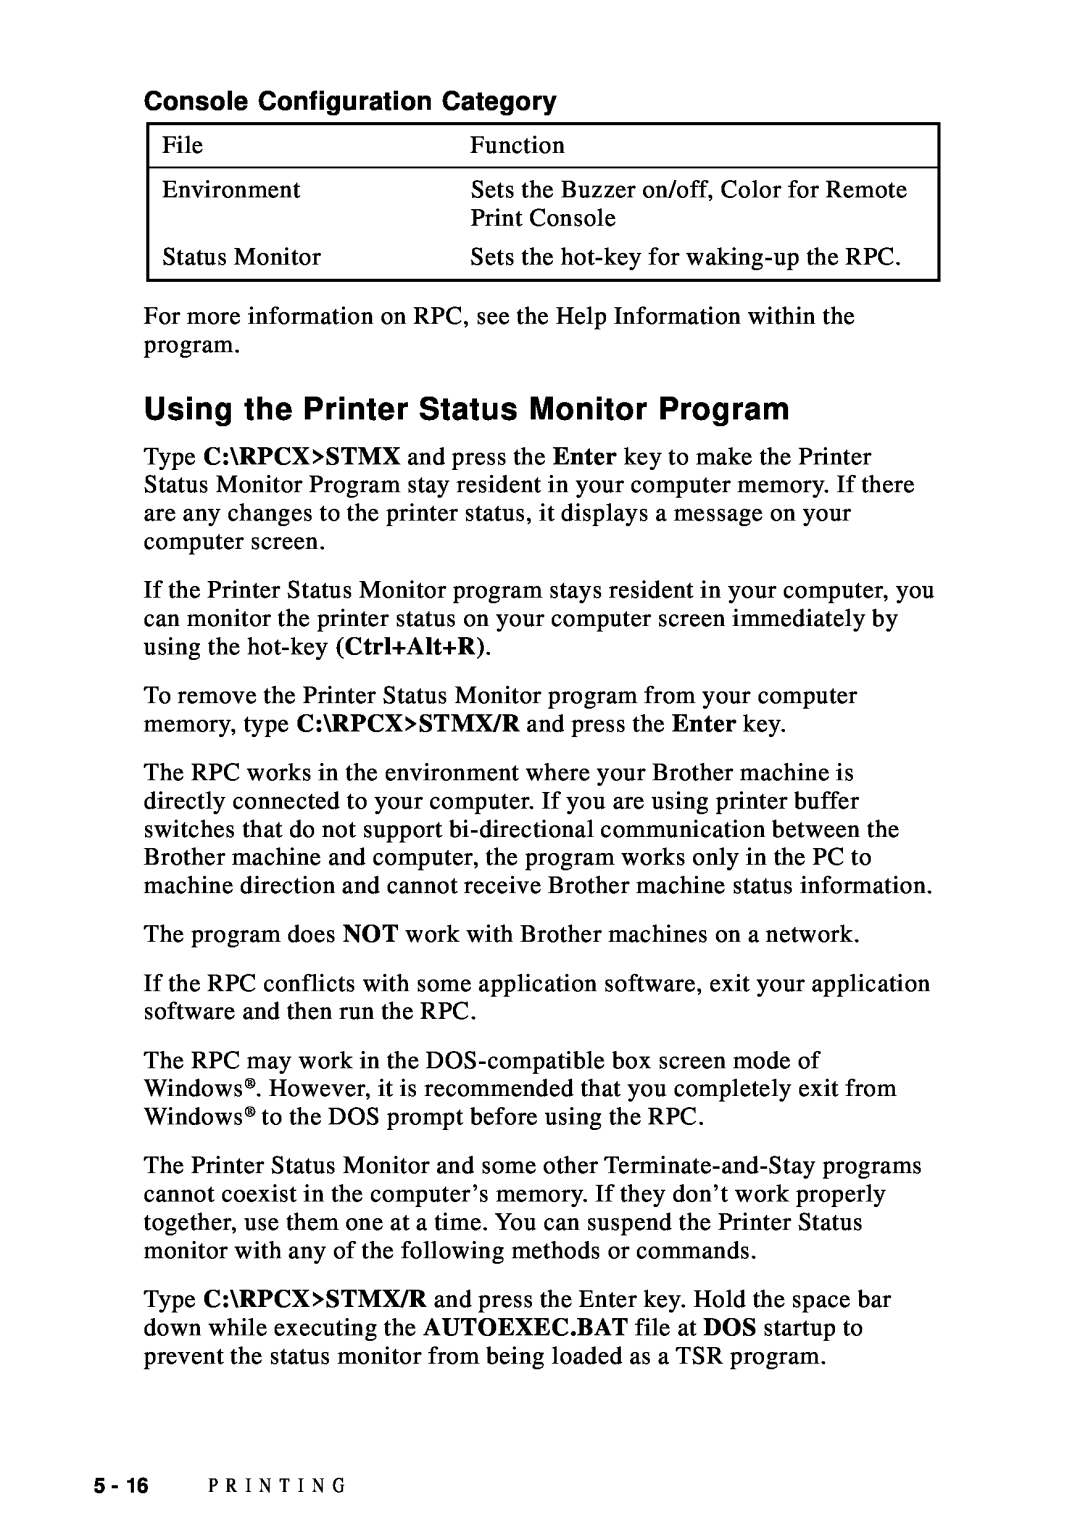 Brother DCP1200 manual Using the Printer Status Monitor Program, Console Configuration Category 